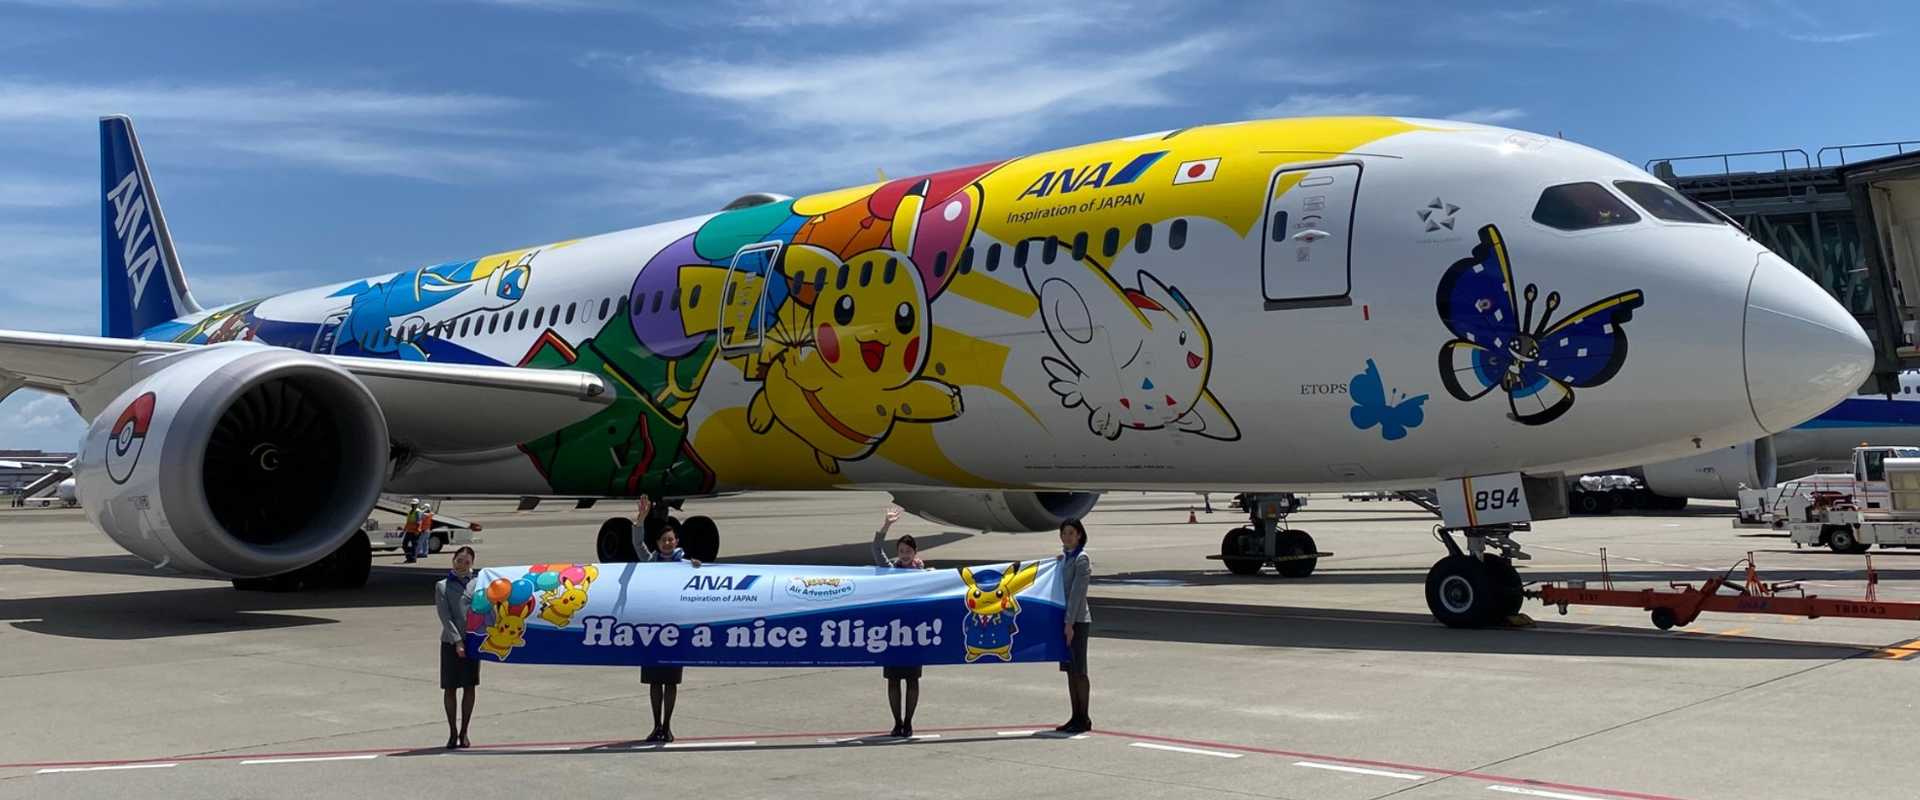 7 of the most unusual and impressive aircraft liveries, MTB Events. Image shows an ANA aircraft with images of Pikachu and other Pokémon along the fuselage.